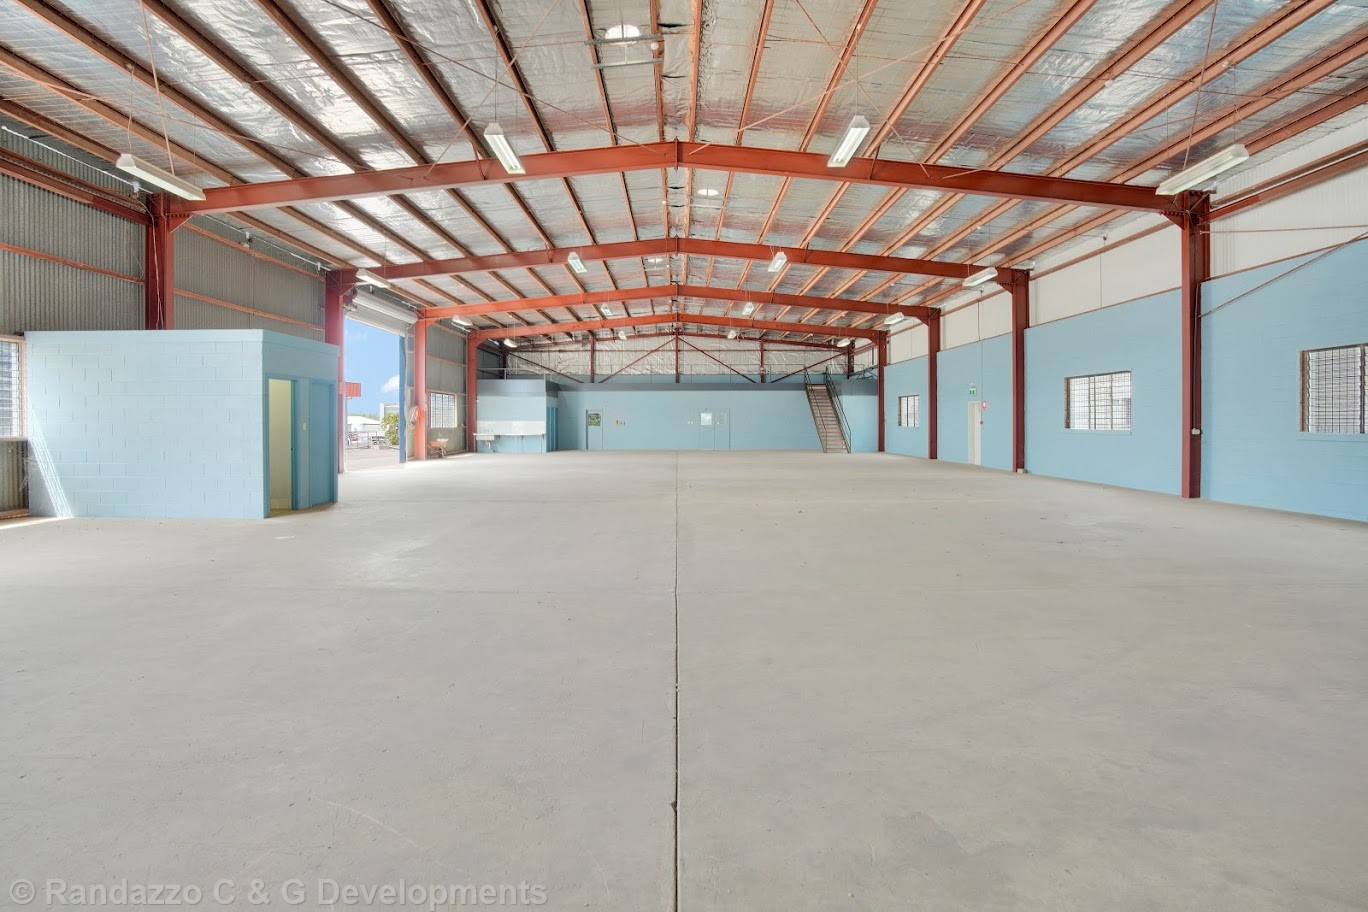 BUILDING 5 - Office & Warehouse with Mezzanine Space